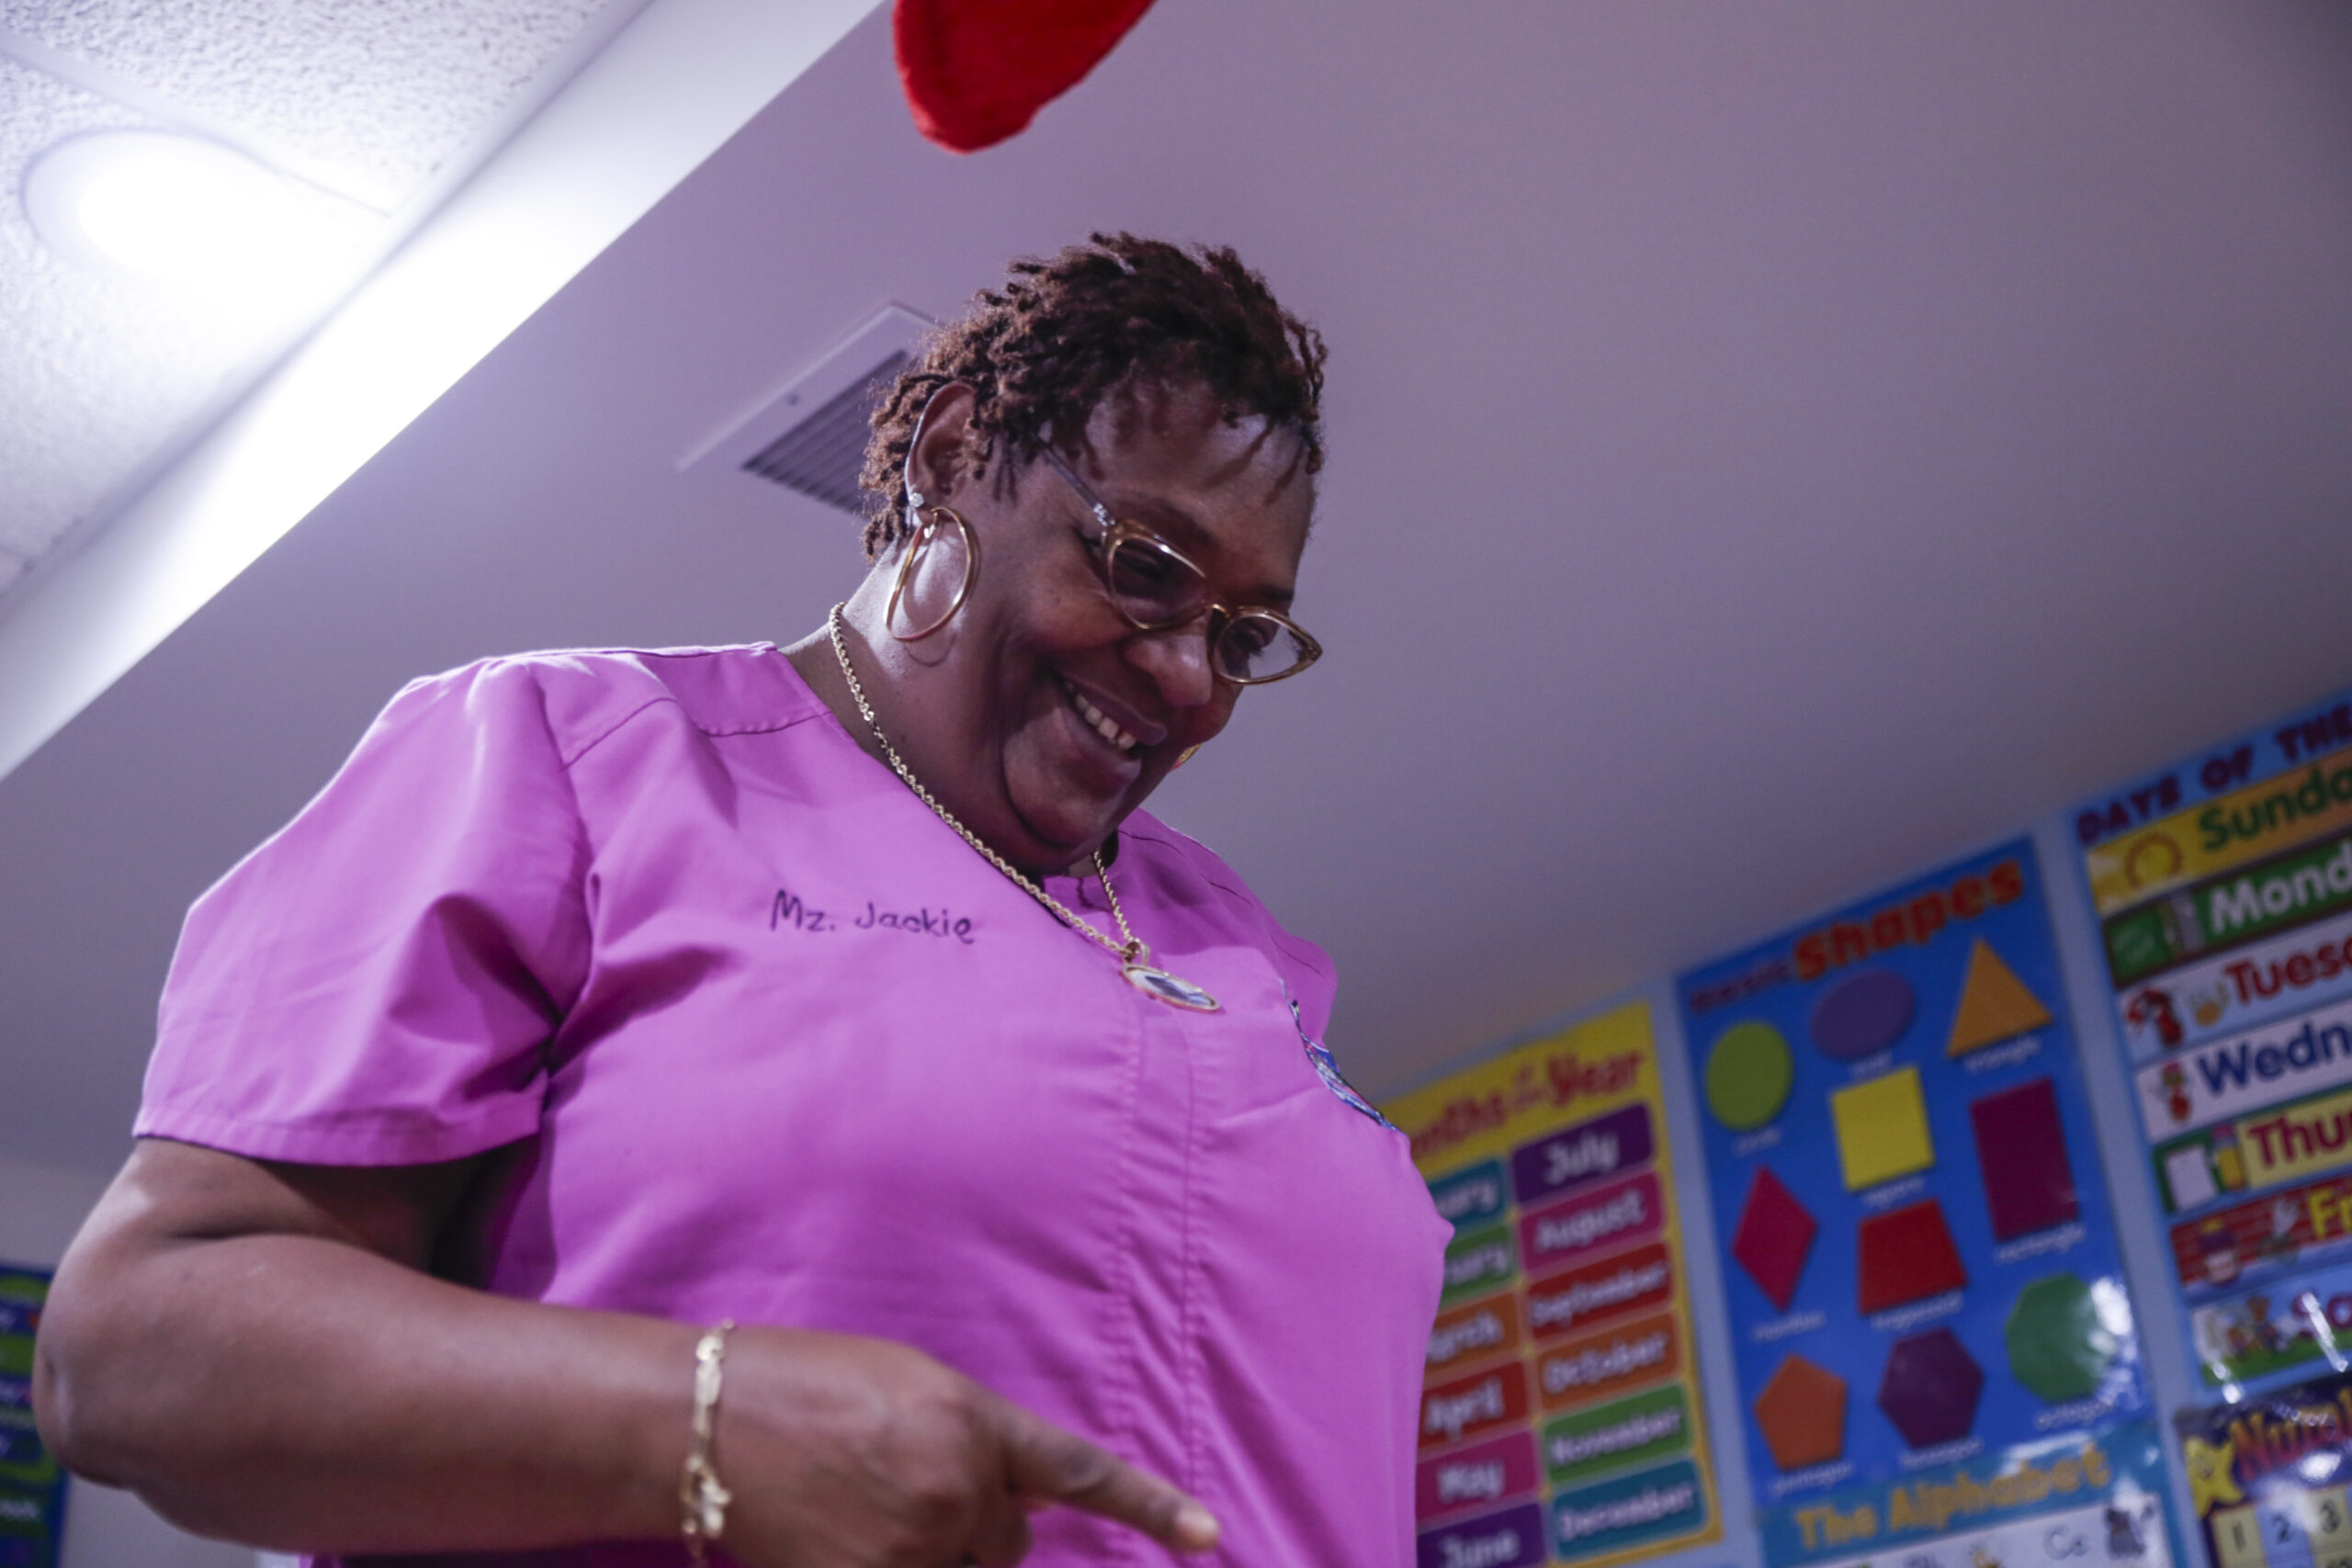 Jacqueline Hopgood-German, or Ms. Jackie, director of The Babies Club early childhood education center in south Chicago, stands smiling above a child, who is out of frame.